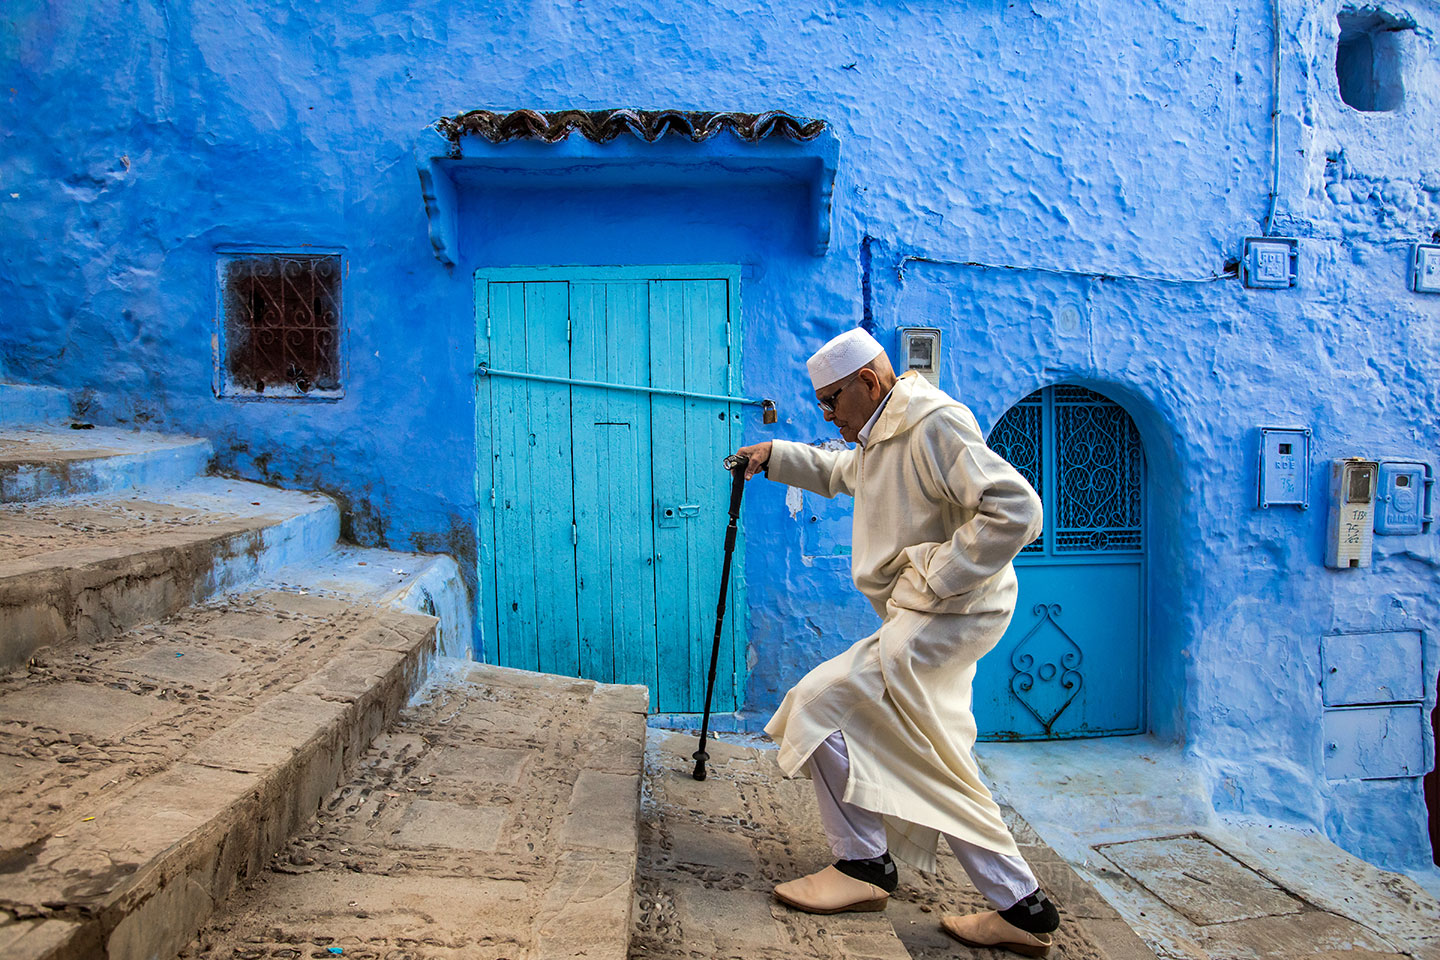 Man on steps in the blue town of Chefchaouen in Morocco